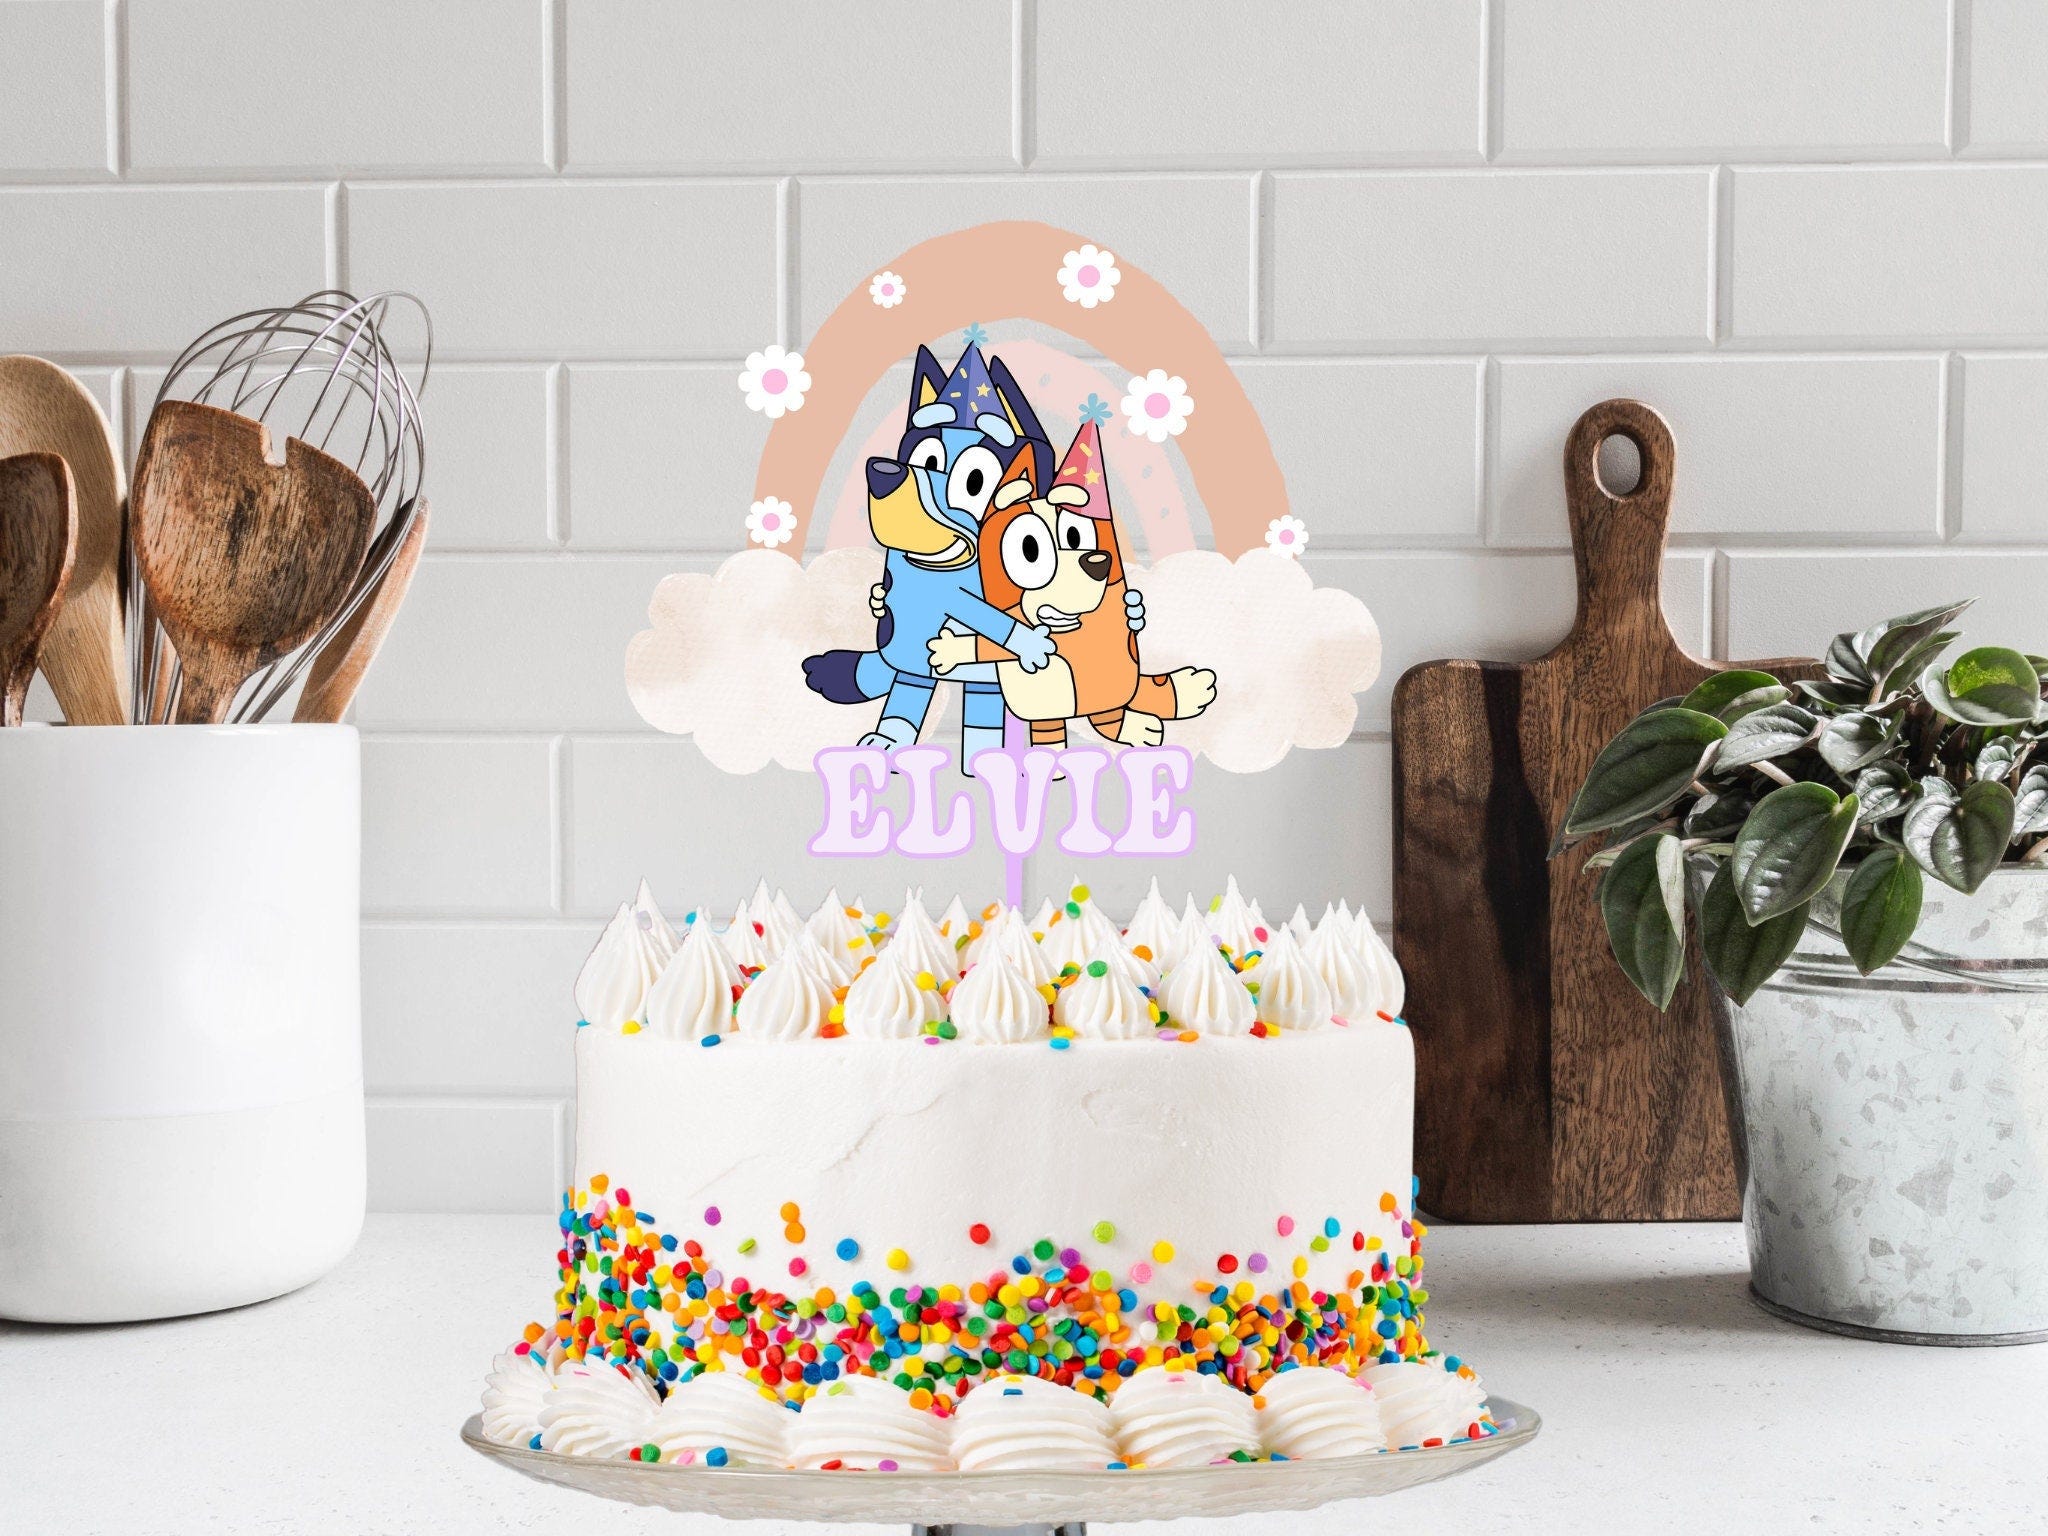 EDITABLE| Bluey Birthday Cake Topper Template, Bingo Birthday, girls birthday cake, bluey party, bluey and bingo, Rainbow, Blue dog toppers